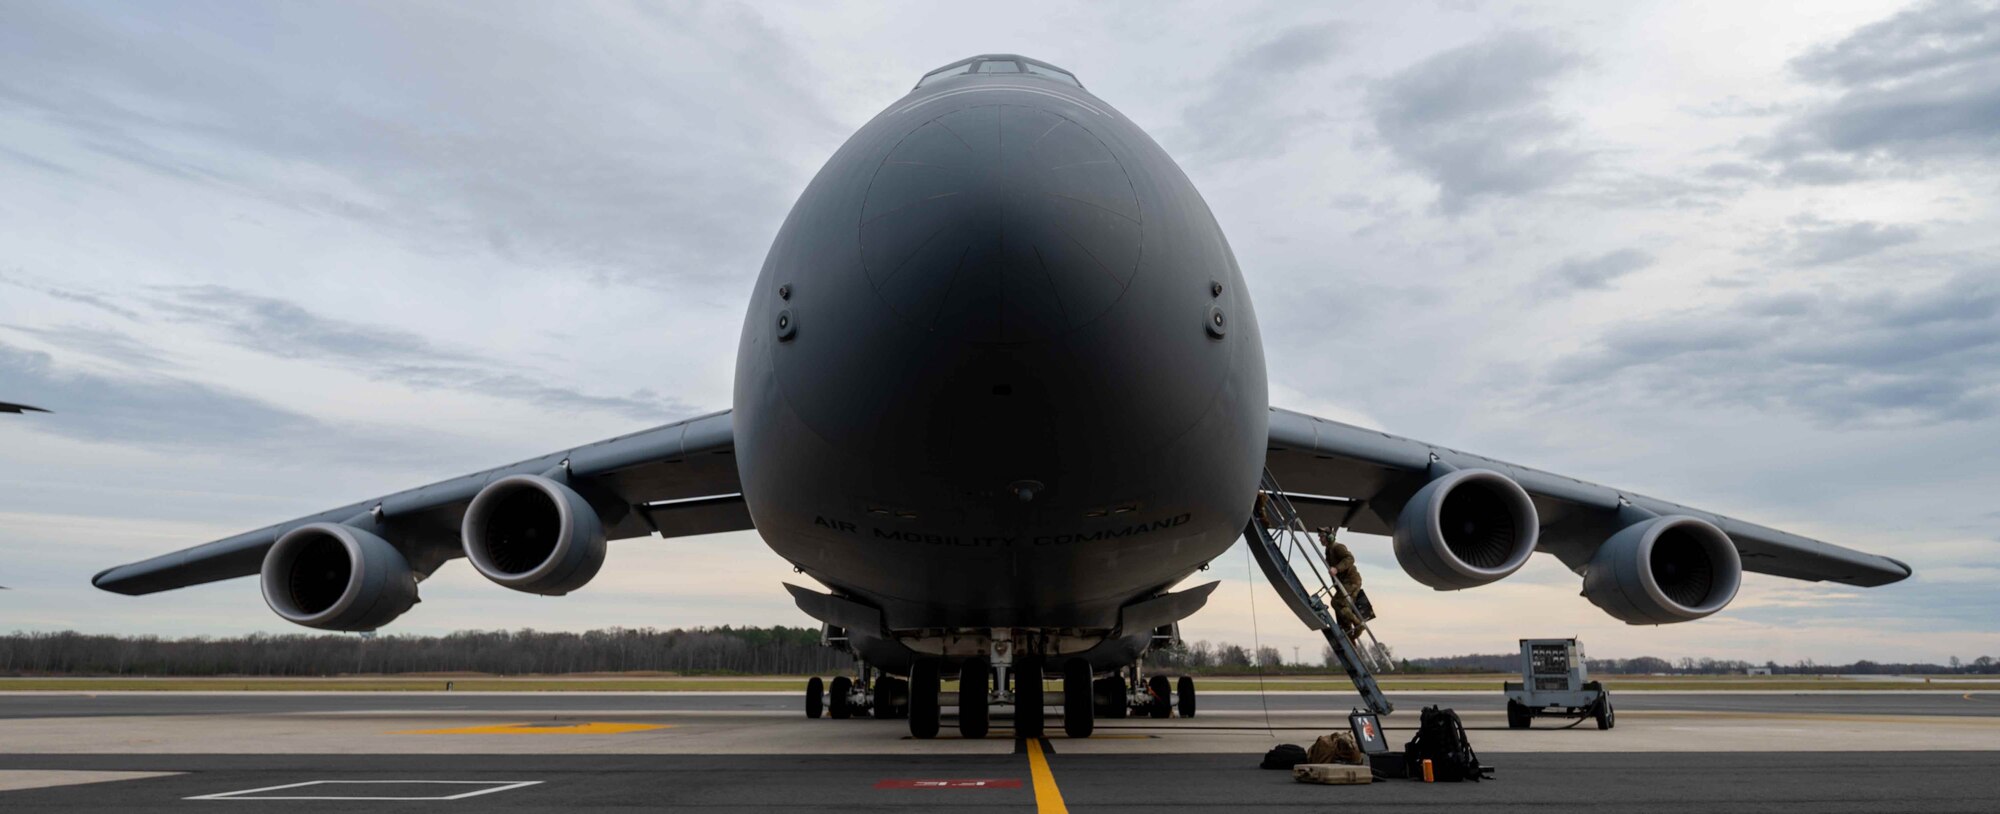 A C-5M Super Galaxy is prepared for a flight to Joint Base McGuire-Dix-Lakehurst, New Jersey, at Dover Air Force Base, Delaware, Dec. 17, 2021. The 9th Airlift Squadron delivered supplies to aid the Joint Base Pearl Harbor-Hickam (JBPHH), Hawaii water quality recovery, a joint U.S. military initiative working closely with the State of Hawaii, Department of Health, Honolulu Board of Water Supply, U.S. government and independent organizations to restore a safe water delivery system to JBPHH military housing communities through testing, treatment, and repair. For detailed information, including available resources and locations, and news, go to www.navy.mil/jointbasewater. (U.S. Air Force photo by Senior Airman Faith Schaefer)